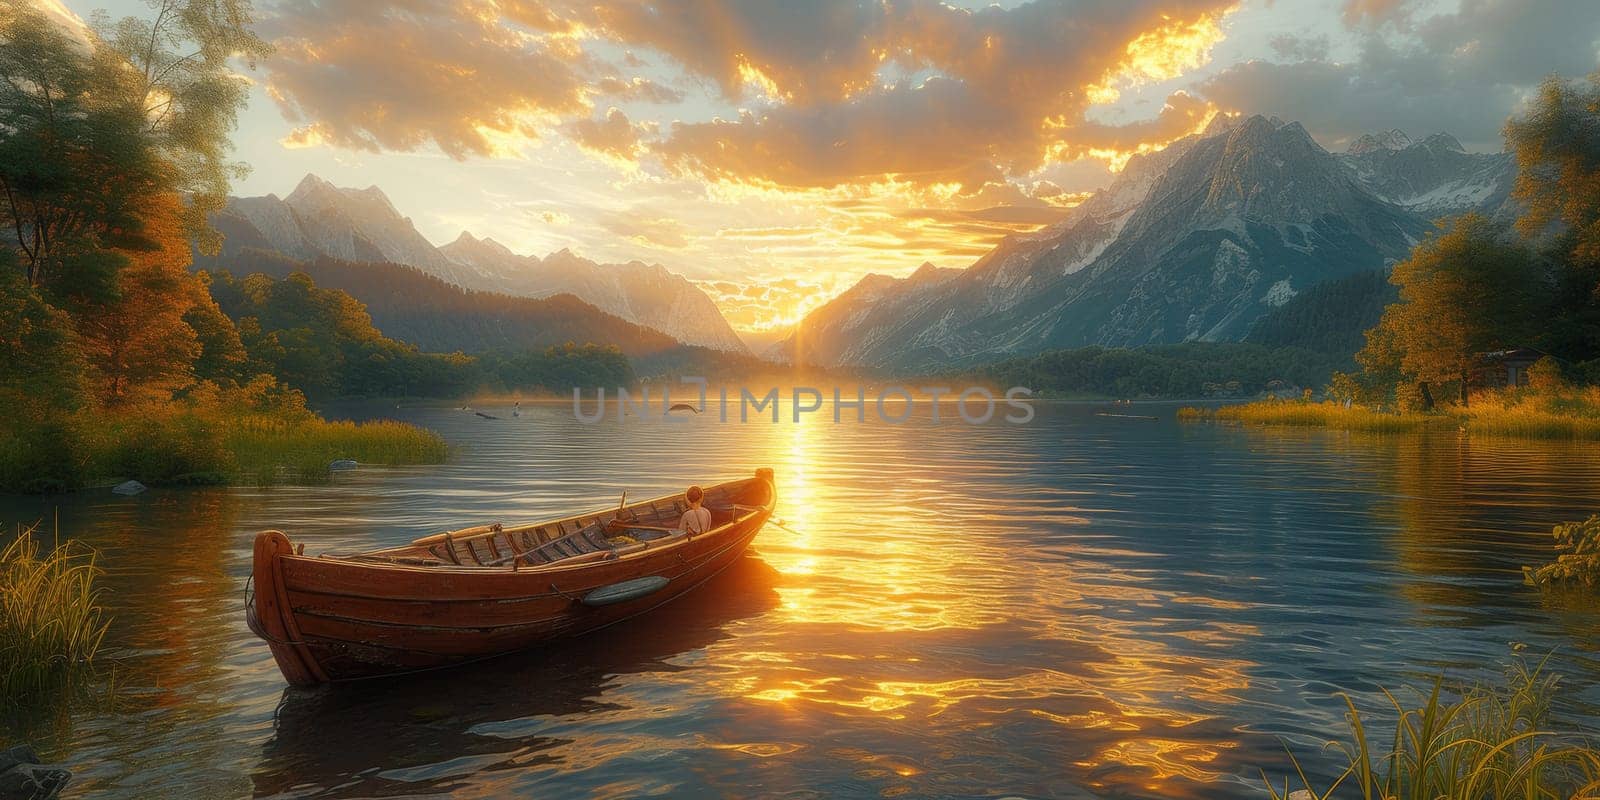 A boat on a lake at sunset with mountains in the background, AI by starush